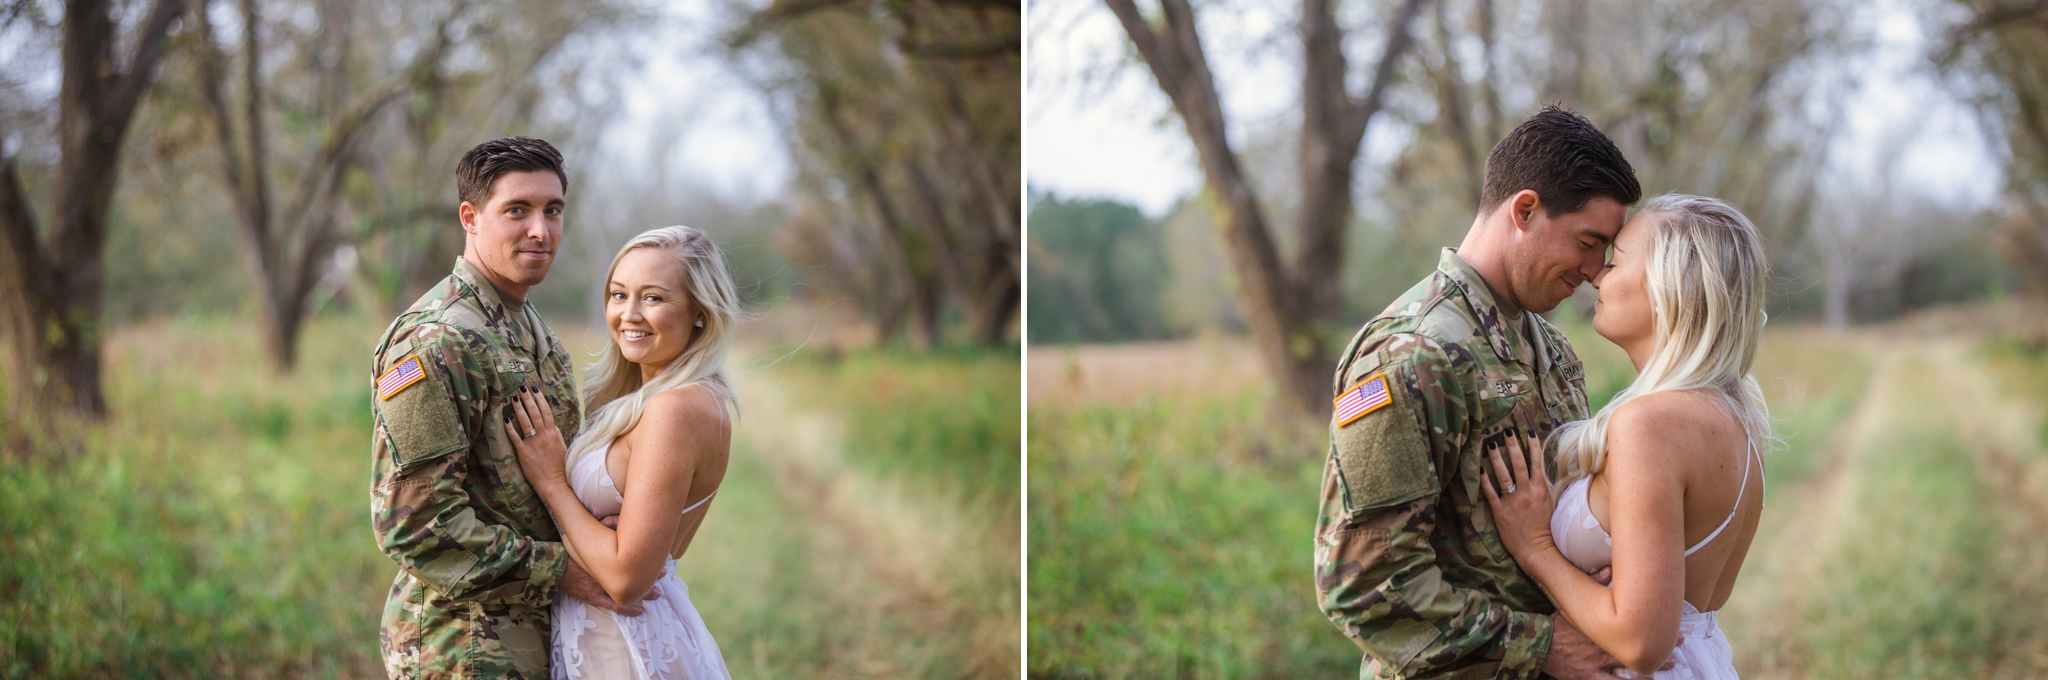 Engagement Photography Session in a cornfield in fayetteville north Carolina - Johanna DYe Photographer 7.jpg